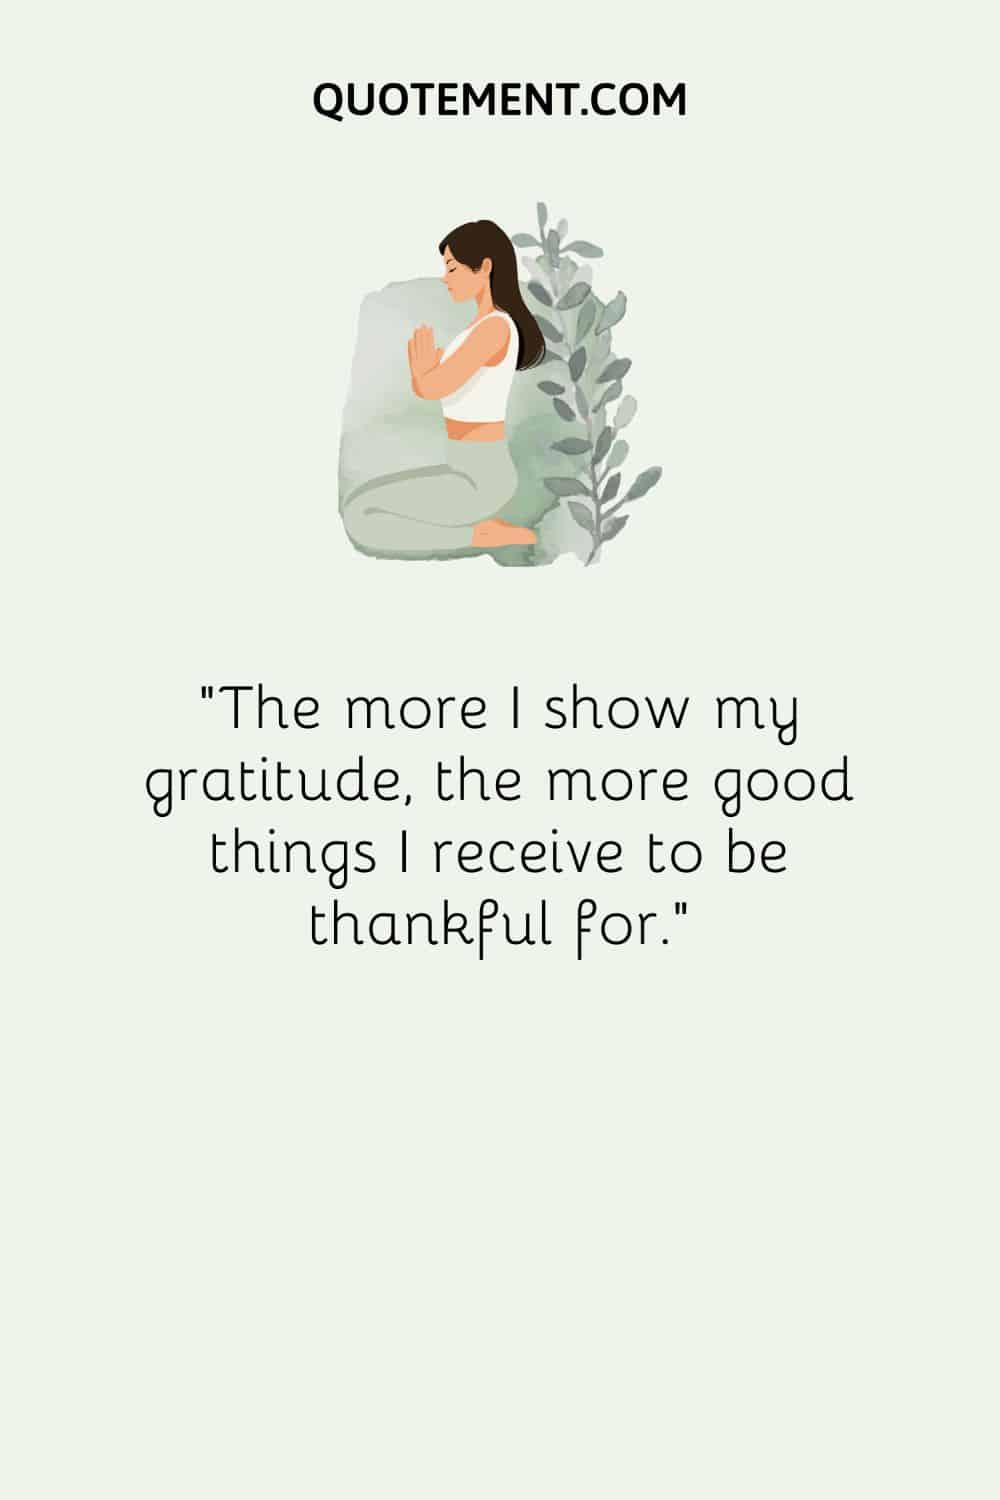 The more I show my gratitude, the more good things I receive to be thankful for